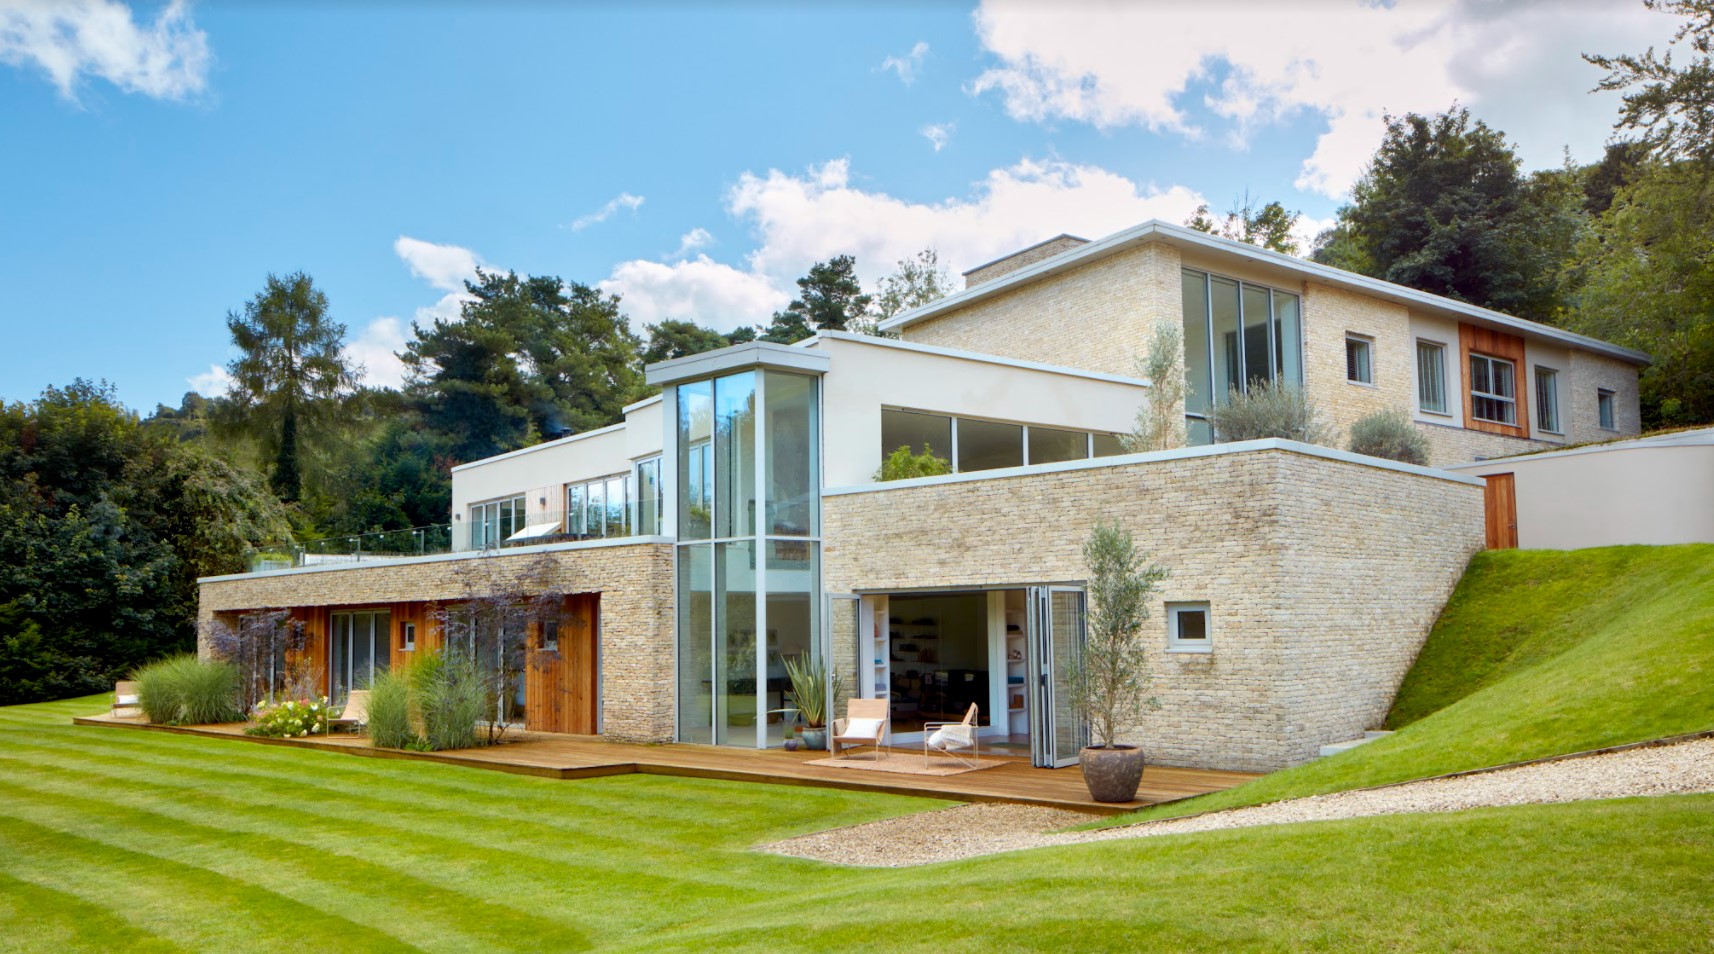 This £3.5m home was won by Susan Havenhand - who never moved in